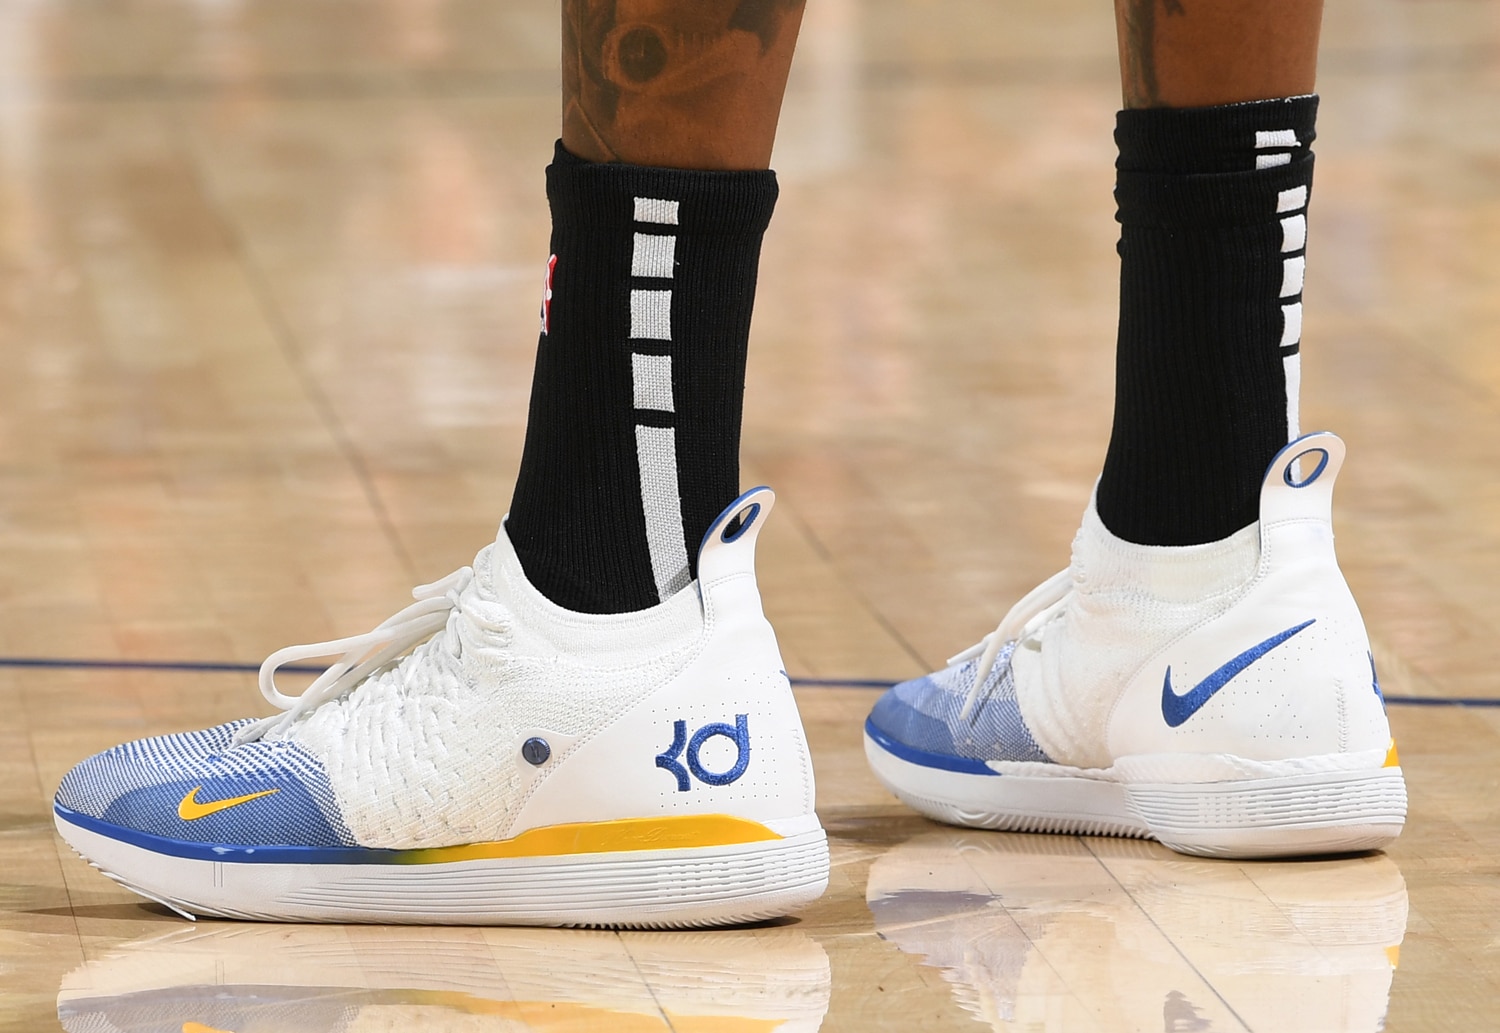 kd opening night shoes